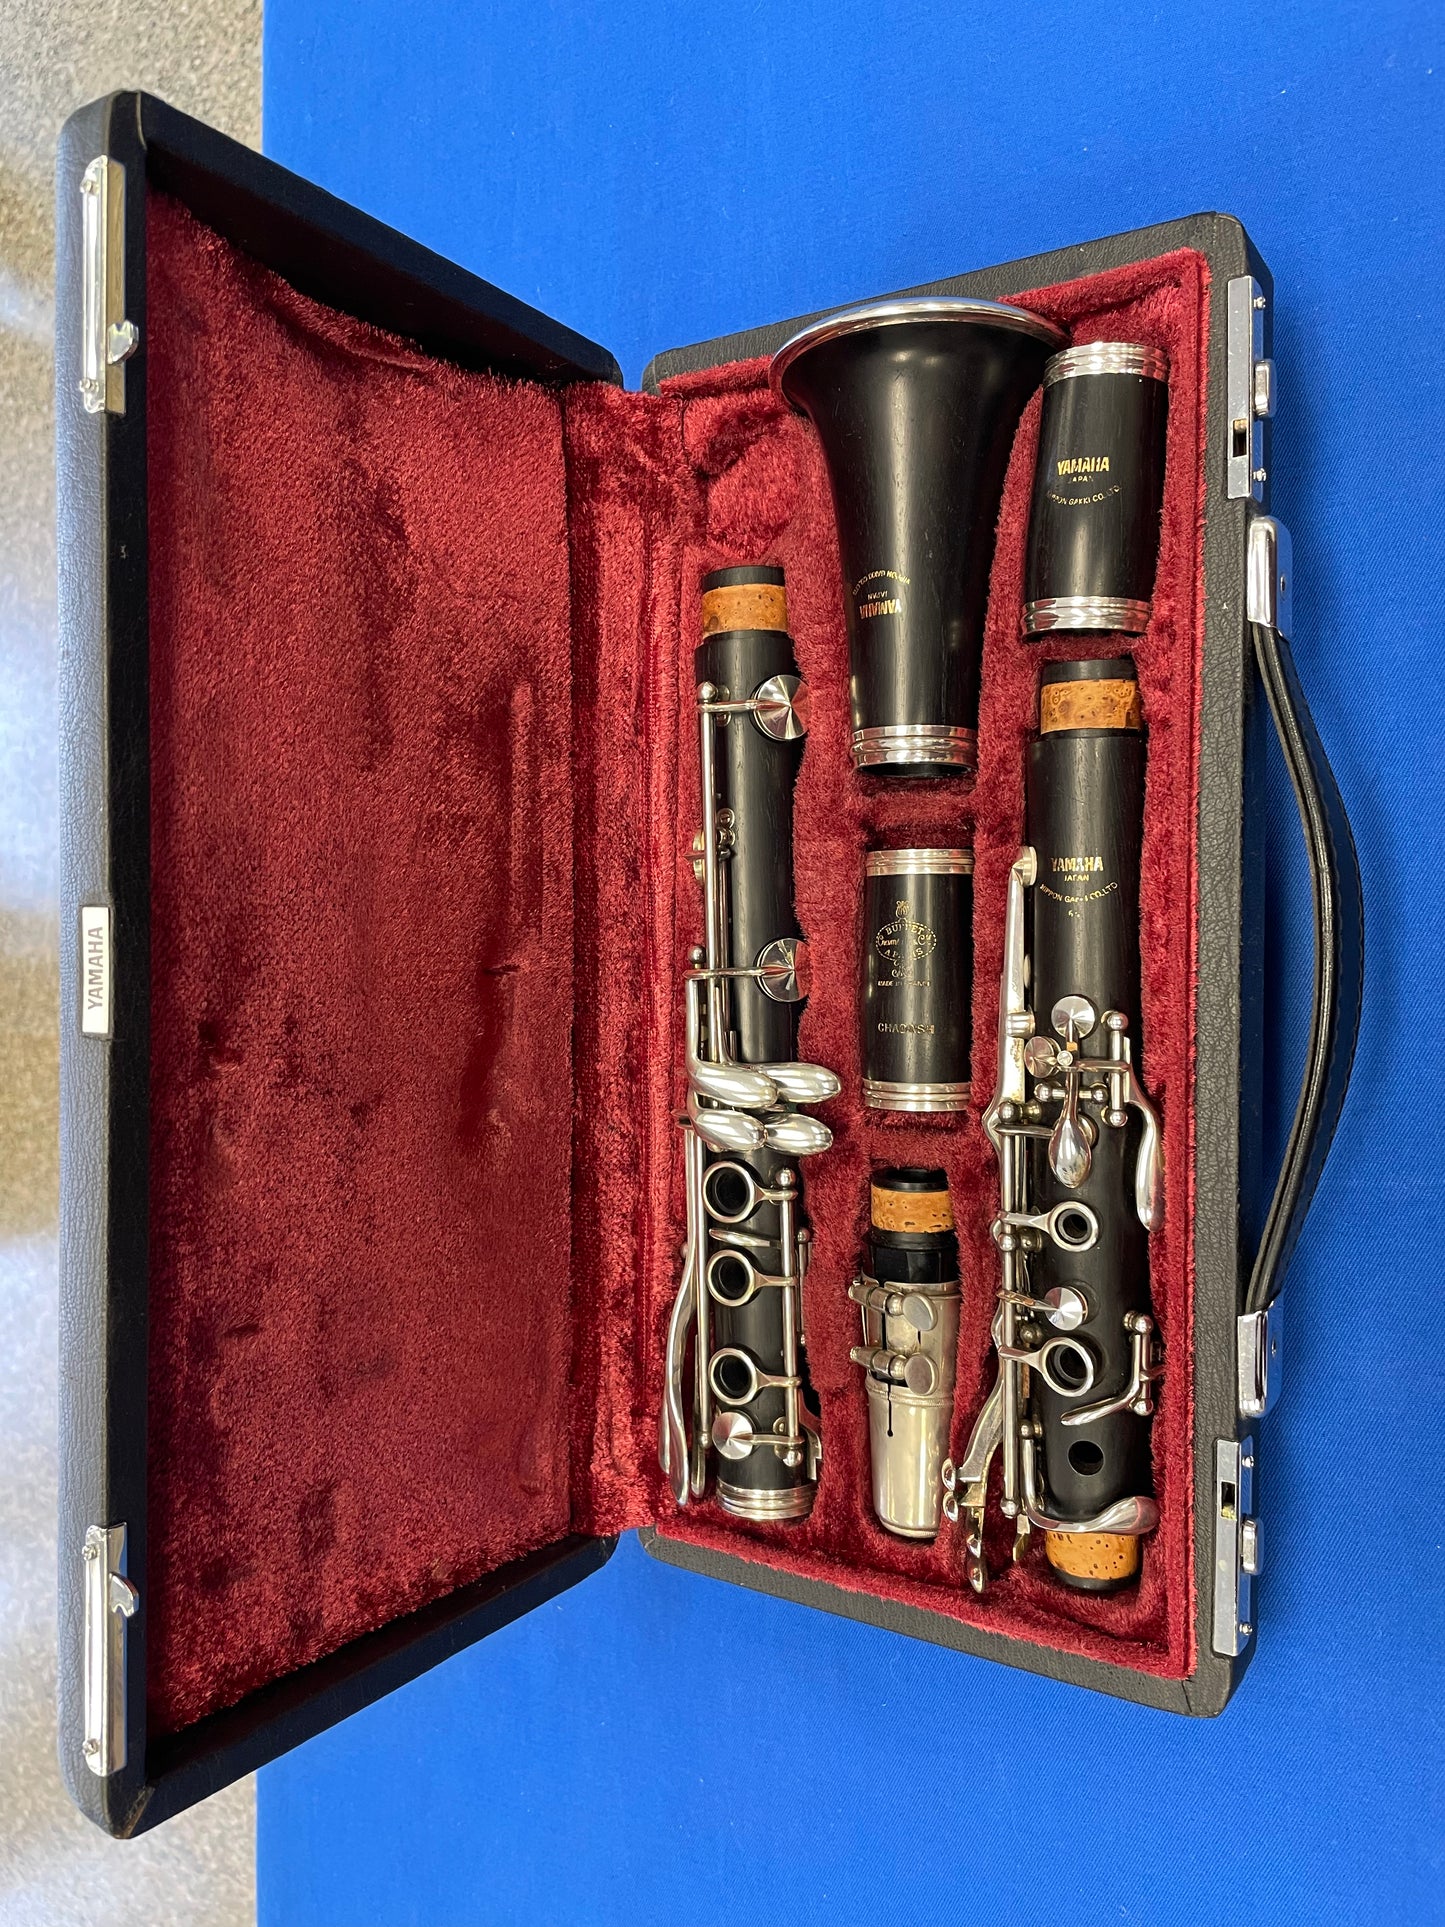 Pre-Owned Yamaha YCL-62ii Clarinet